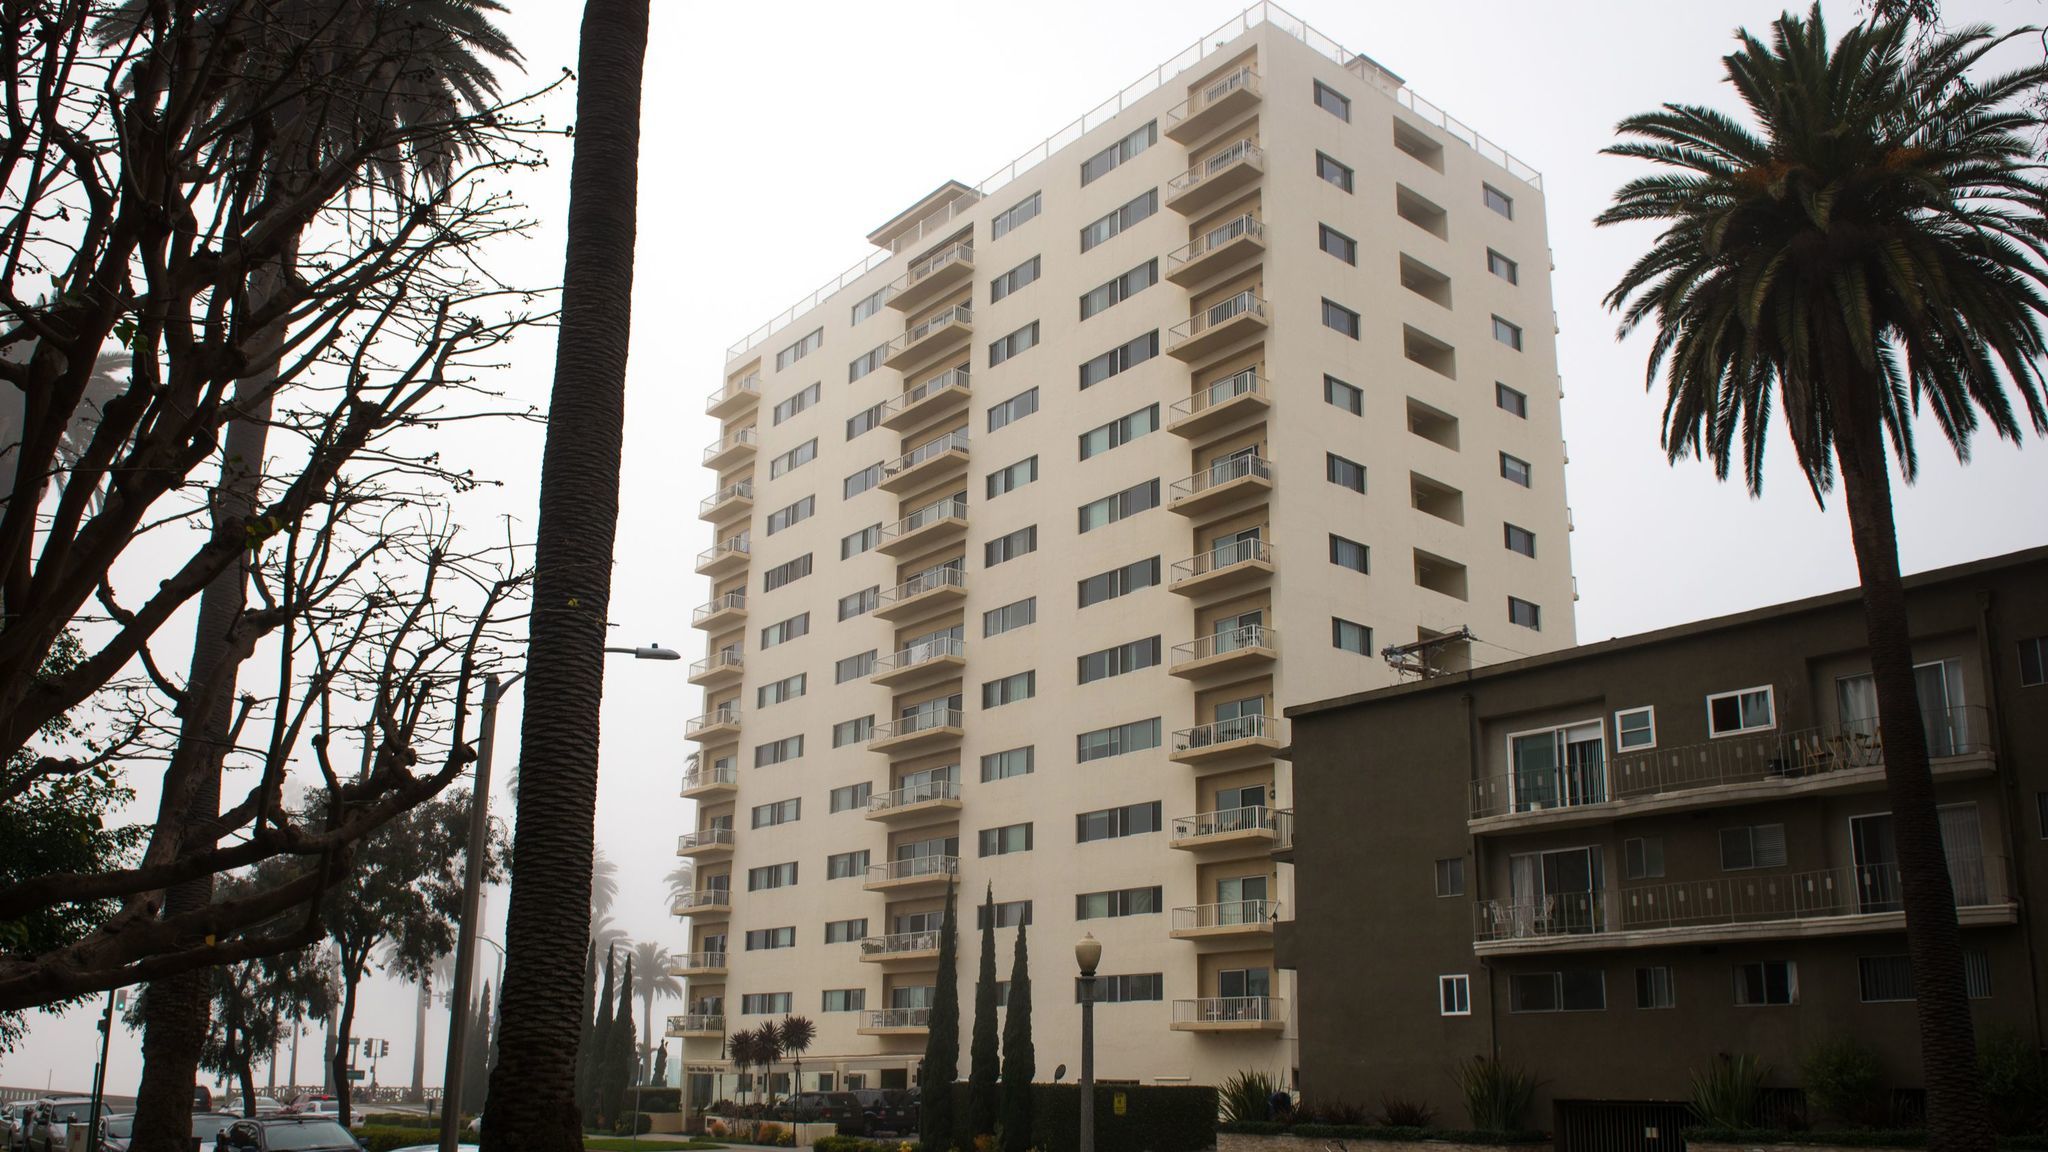 A 13-story condominium, listed by the city as a steel moment-frame building, could be required to undergo a seismic evaluation under a proposed law. City records say there are 79 steel moment-frame buildings that could be vulnerable in an earthquake.